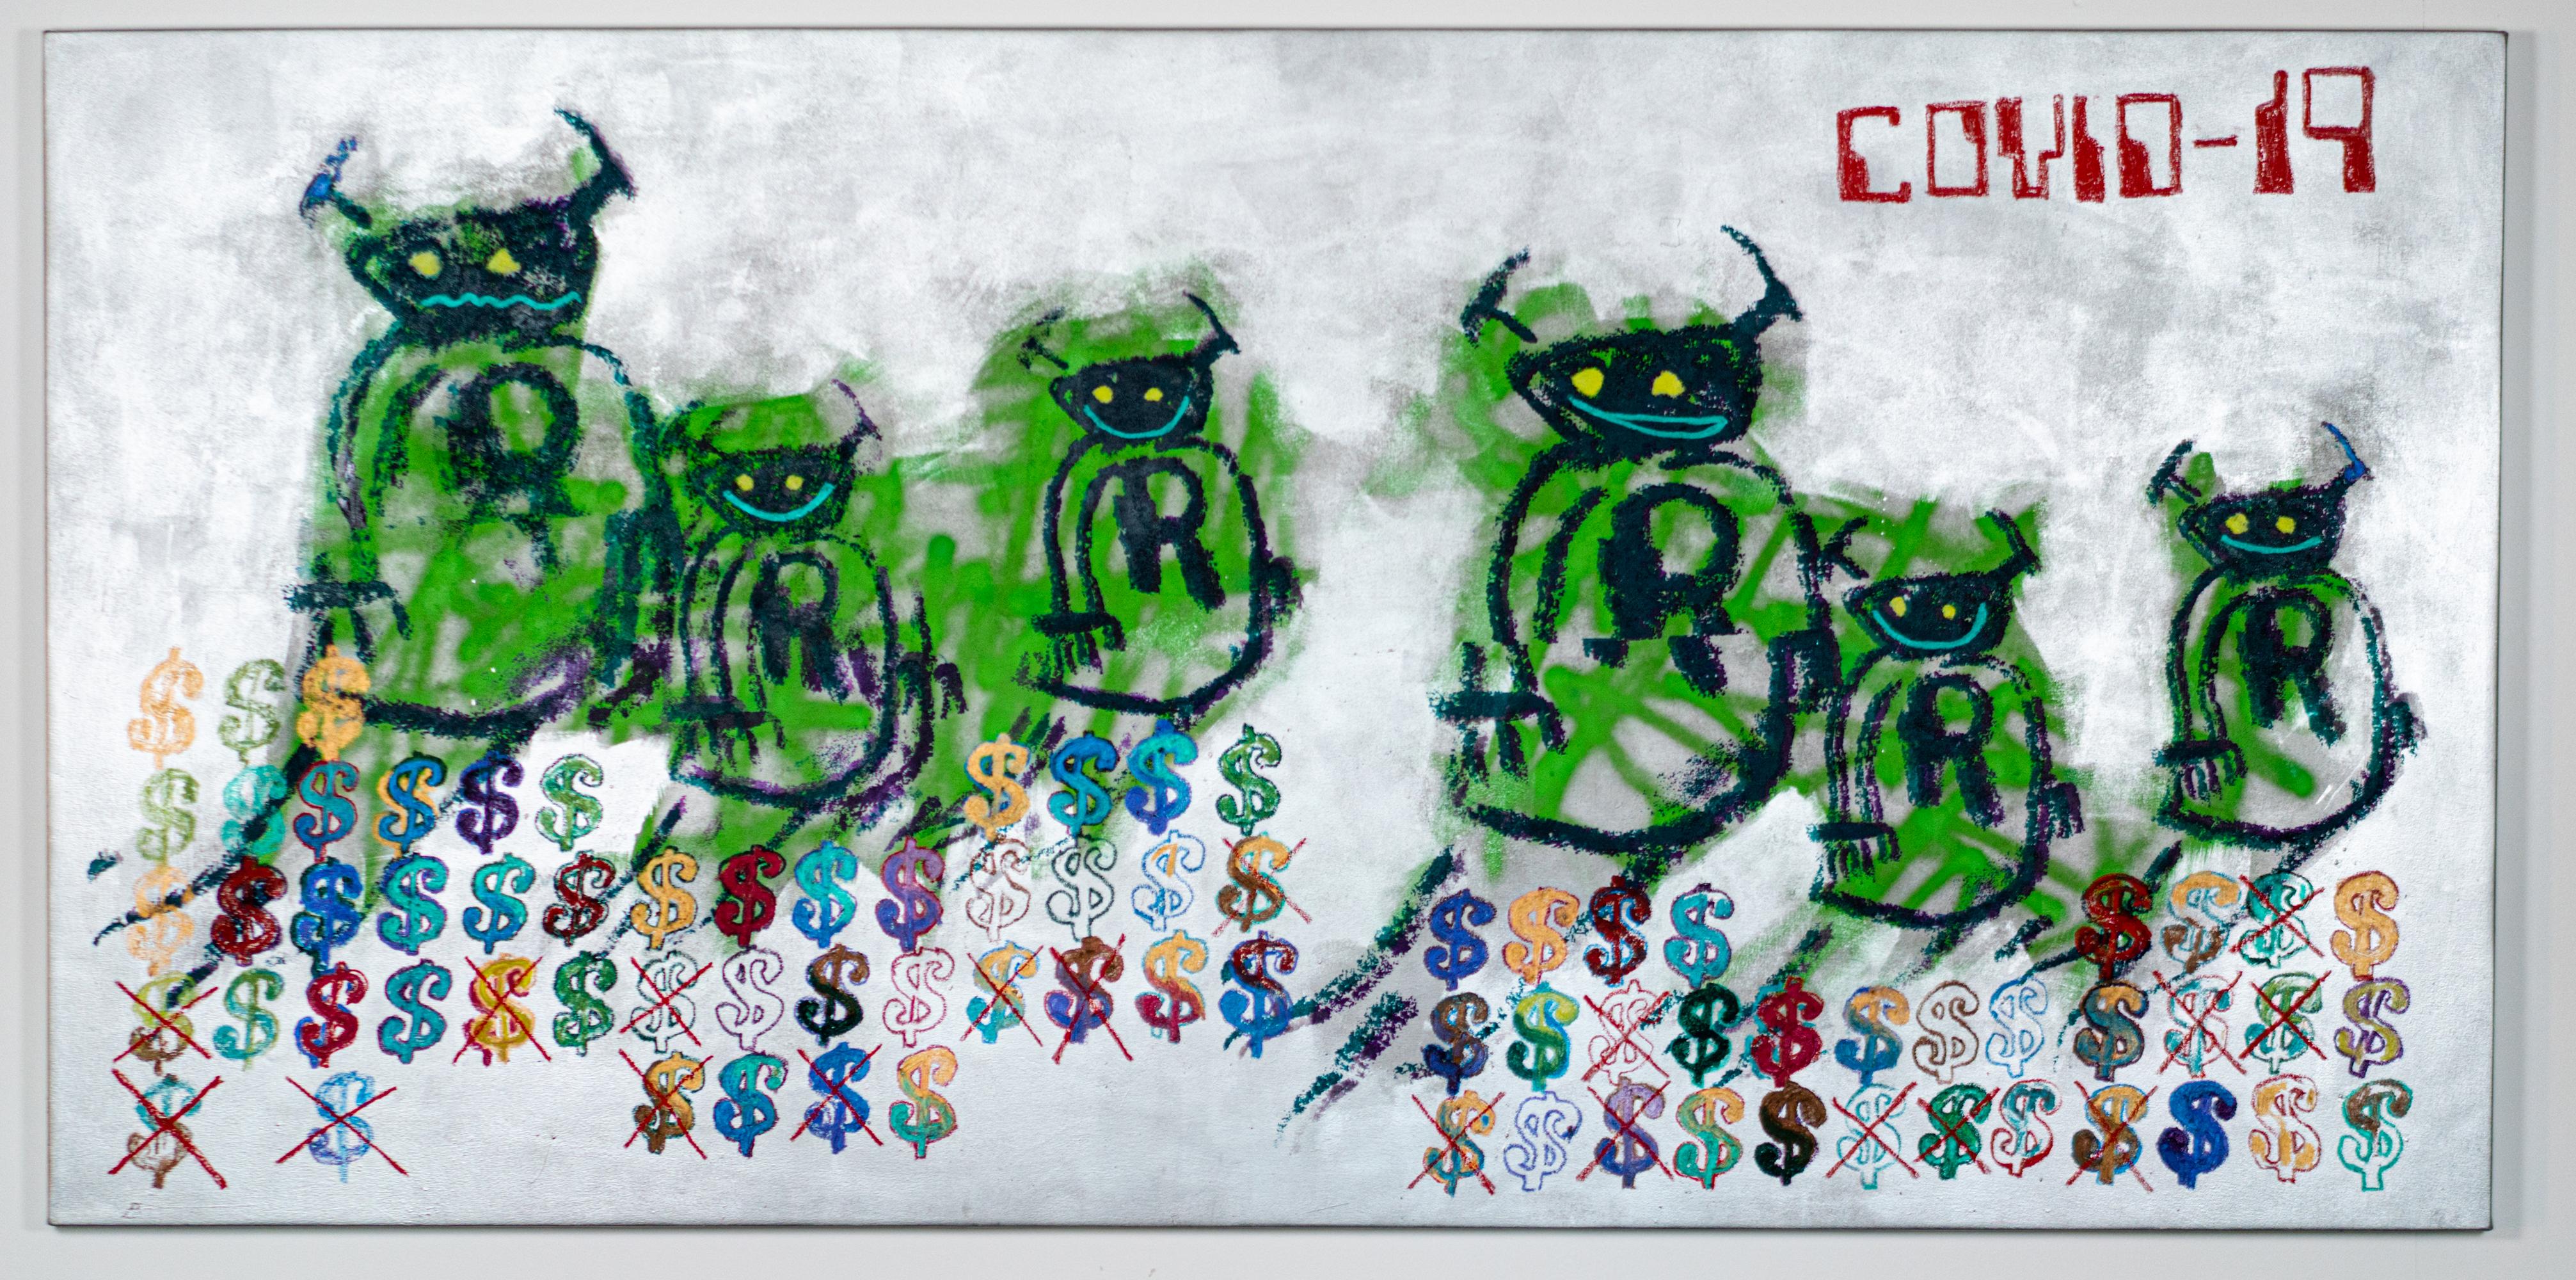 This large scale 113" x 55" mixed media painting by XVALA was created during the pandemic and features floating green robots on a silver canvas with multi-color dollar signs throughout. The COVID-19 pandemic has had a devastating effect on the